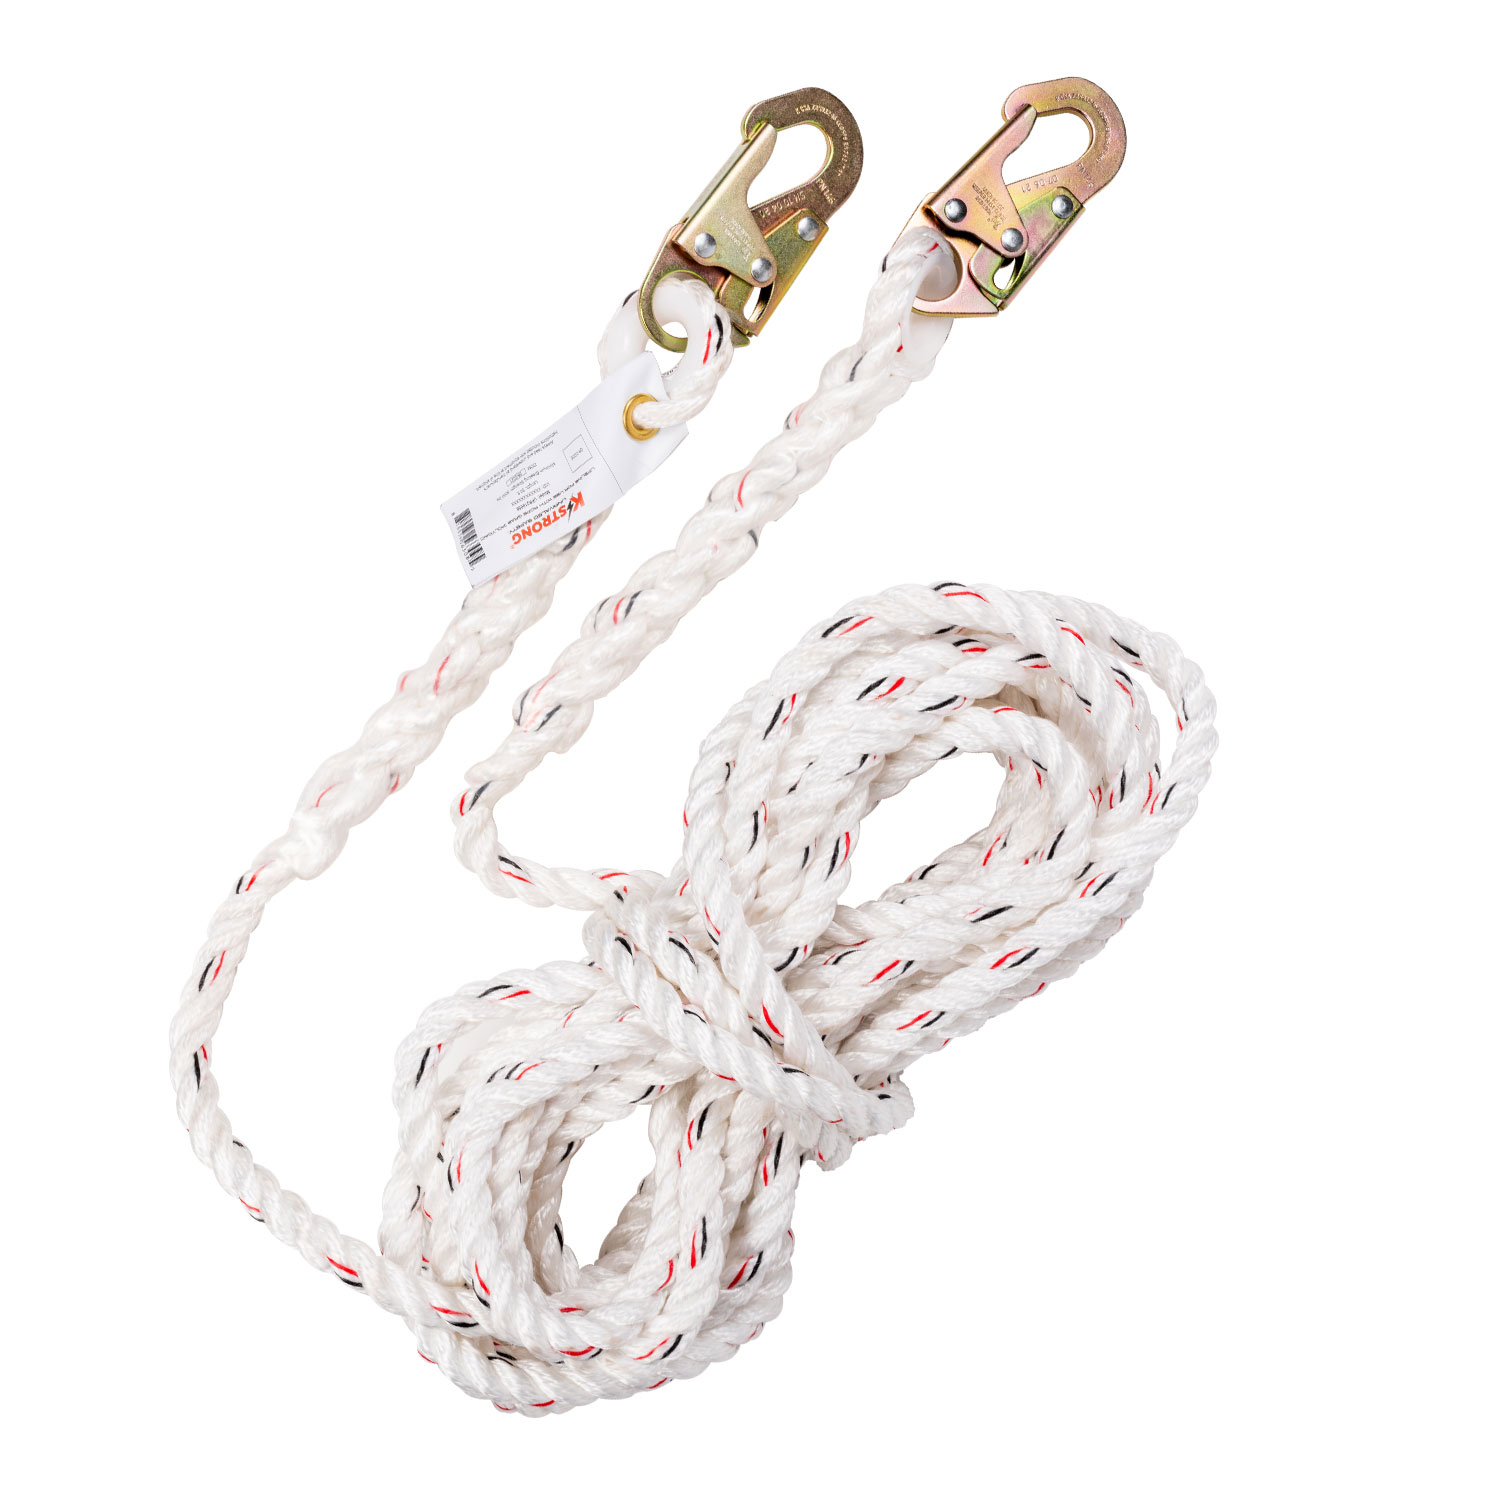 KStrong® 100 ft. Vertical White Polydac Rope Lifeline with Snap Hooks at  Both Ends - KStrong